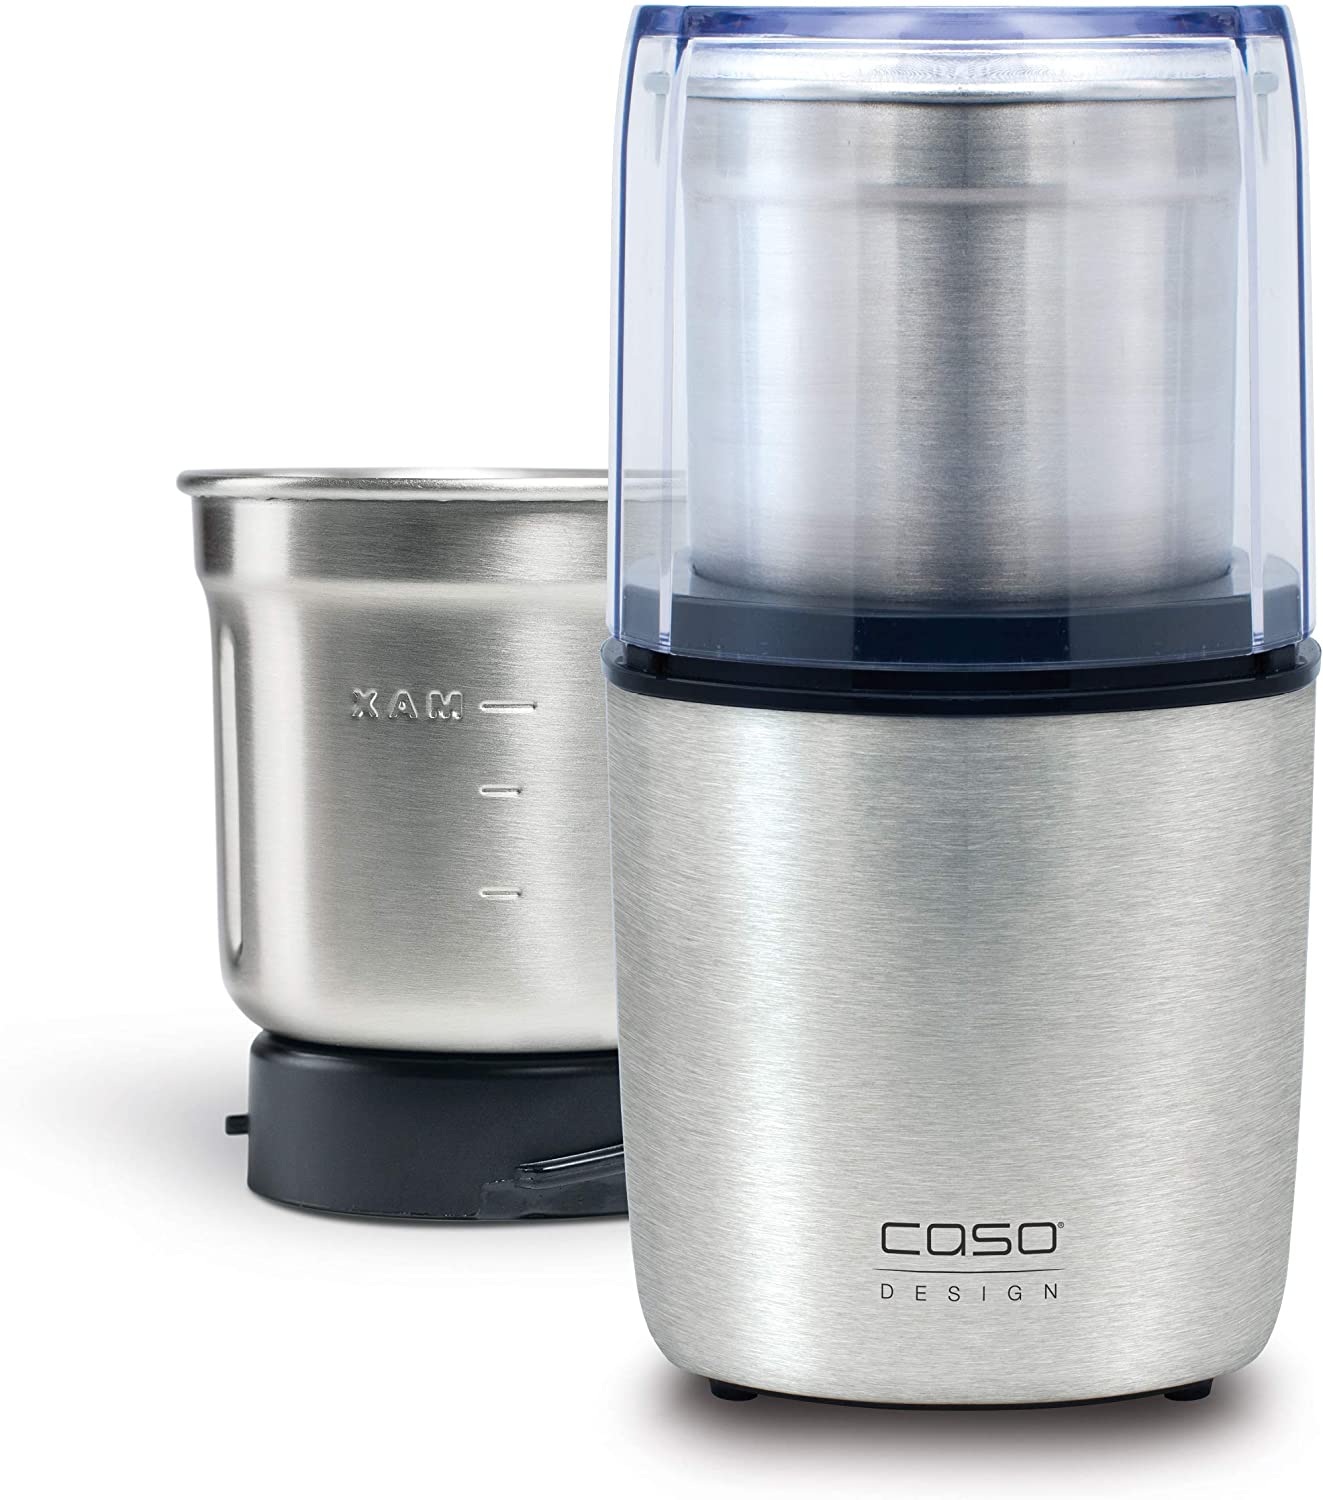 CASO Coffee & Kitchen Flavour, Electric Coffee Grinder, Stainless Steel Chopper with Extra Stainless Steel Container for Pesto, Nuts, Spices, Herbs and Much More, 200 Watt, Silver